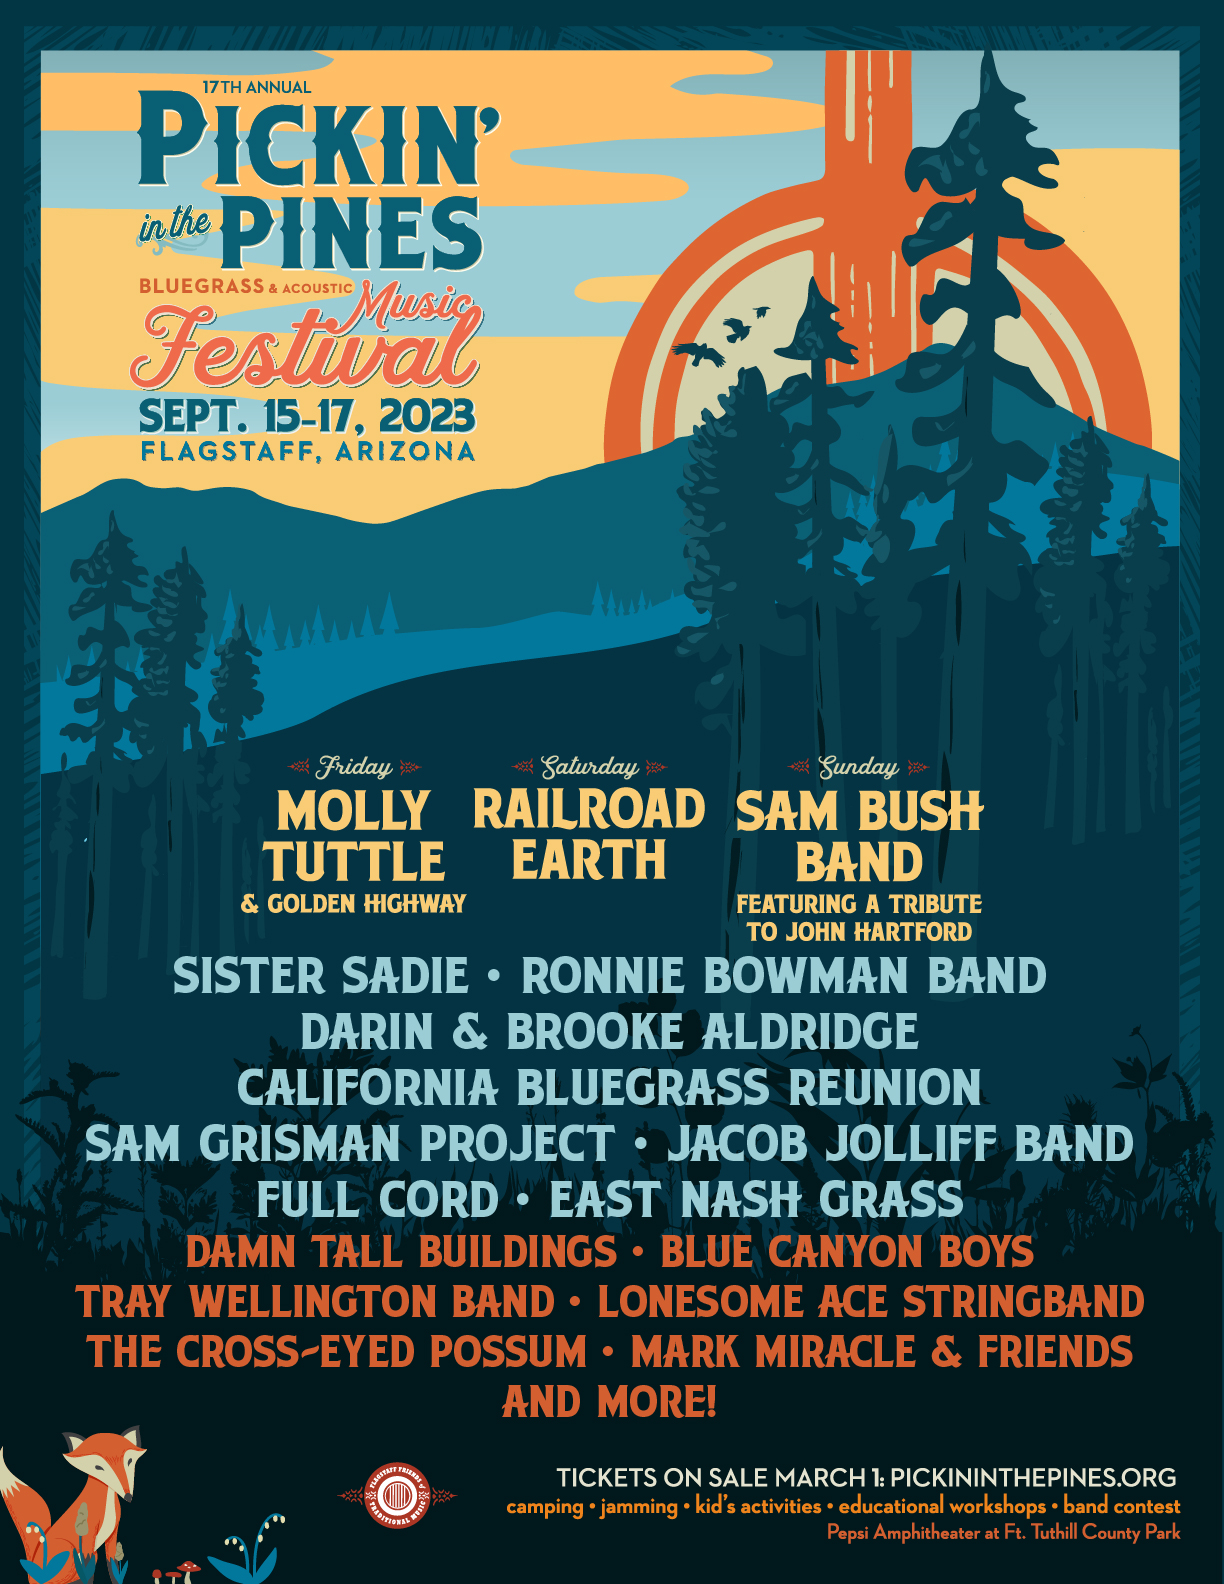 Pickin' in the Pines Bluegrass Festival 2023